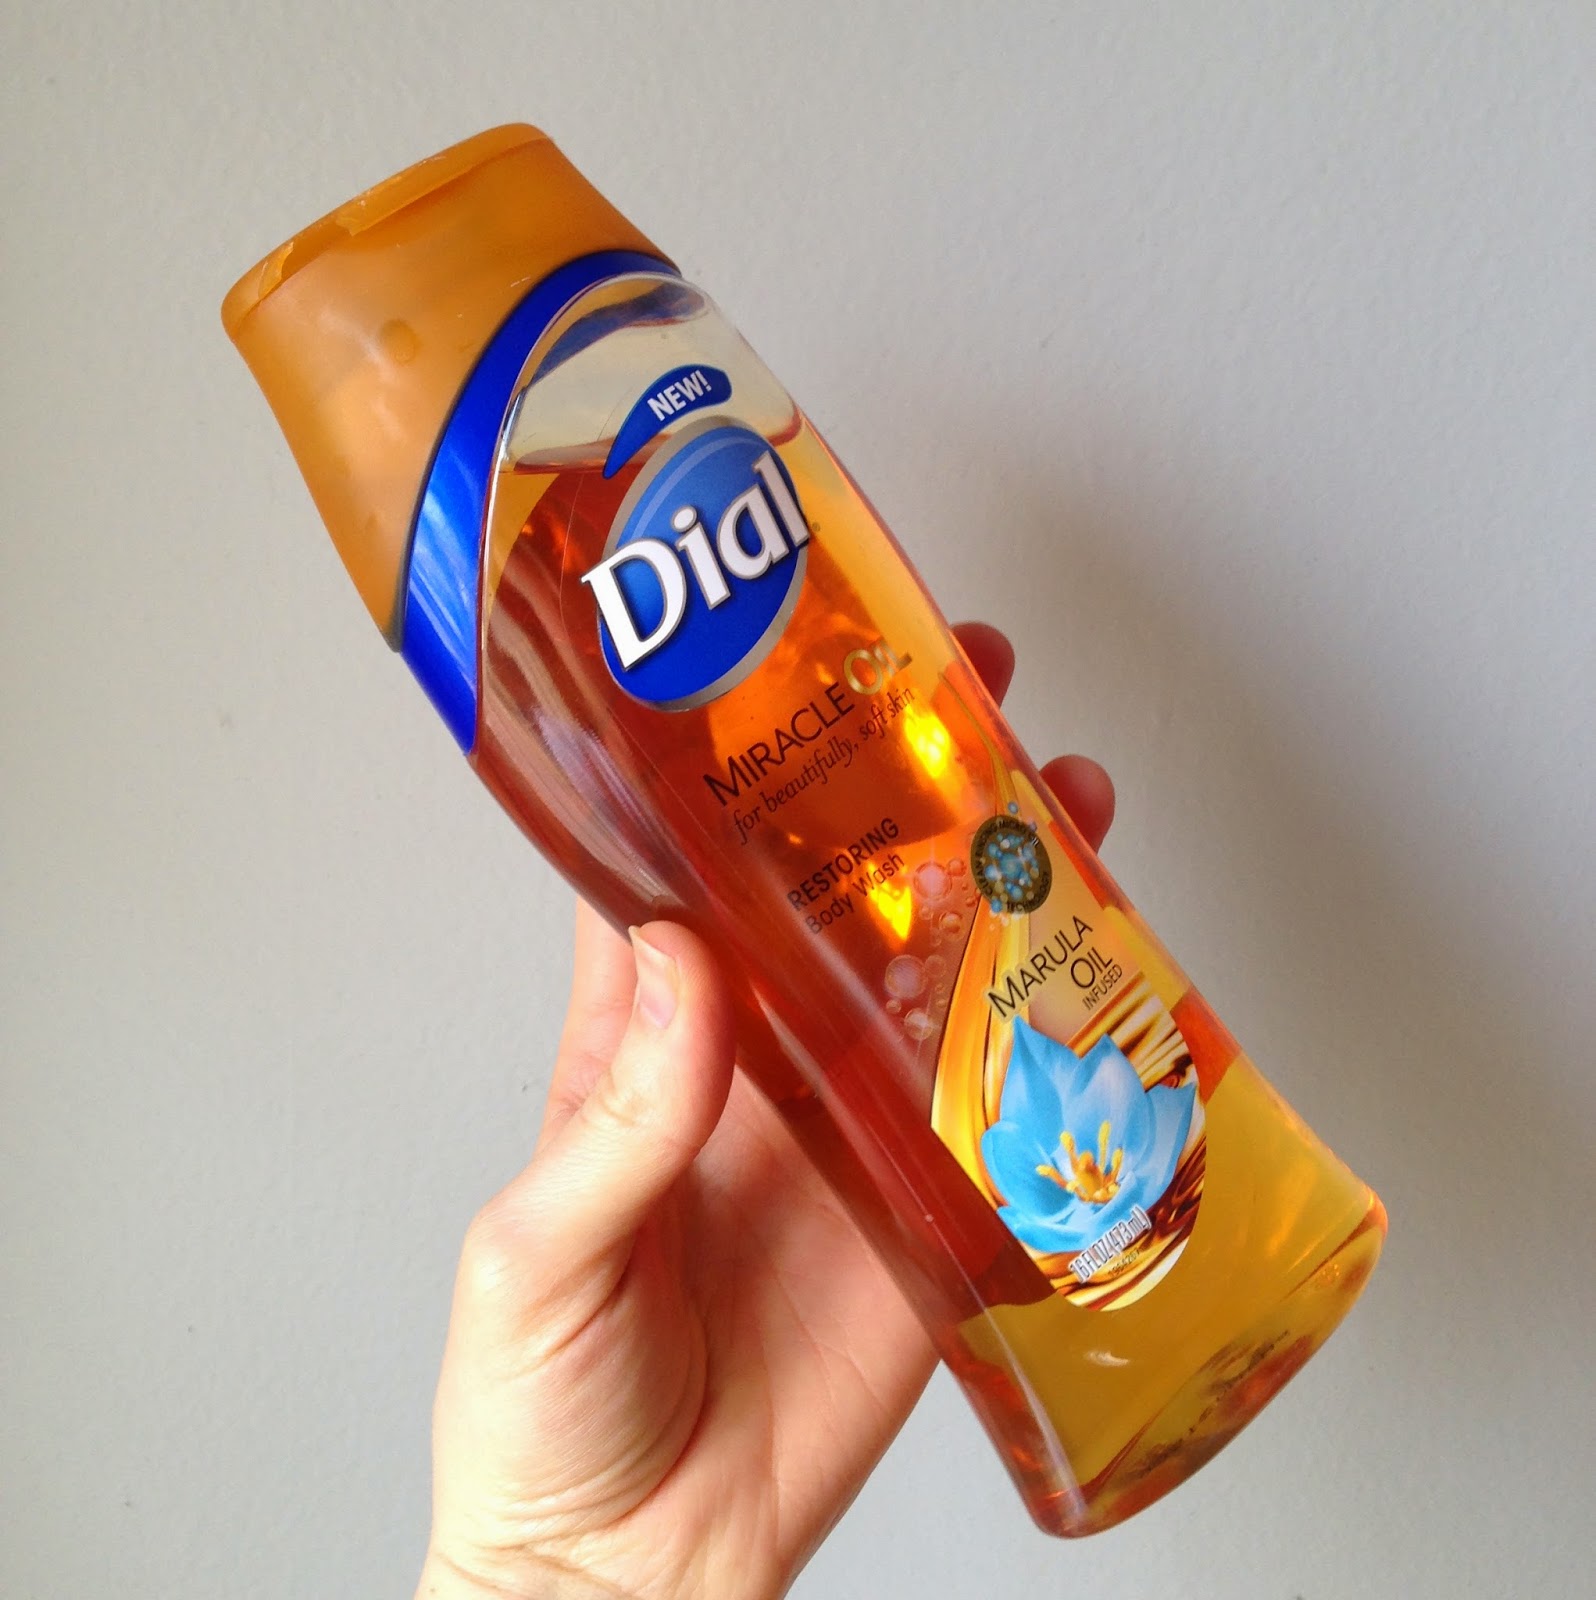 Dial Miracle Oil Review & Giveaway (ends 3/23/15)